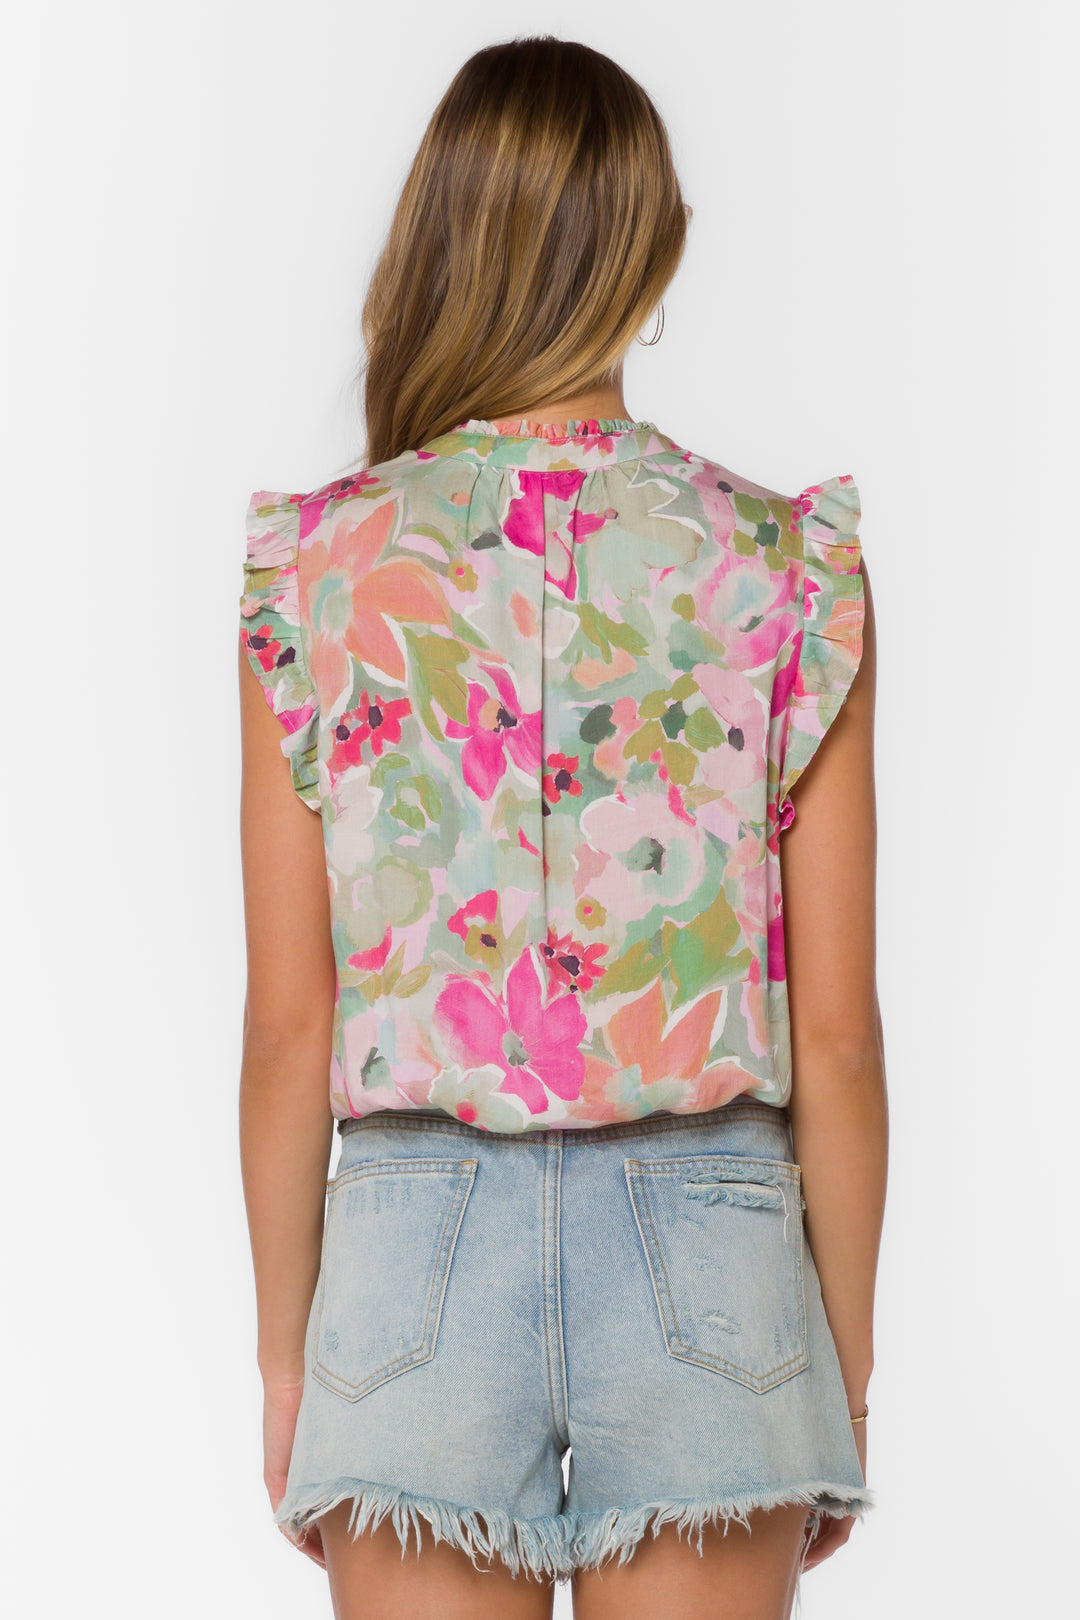 Colima Painted Floral Top - Tops - Velvet Heart Clothing